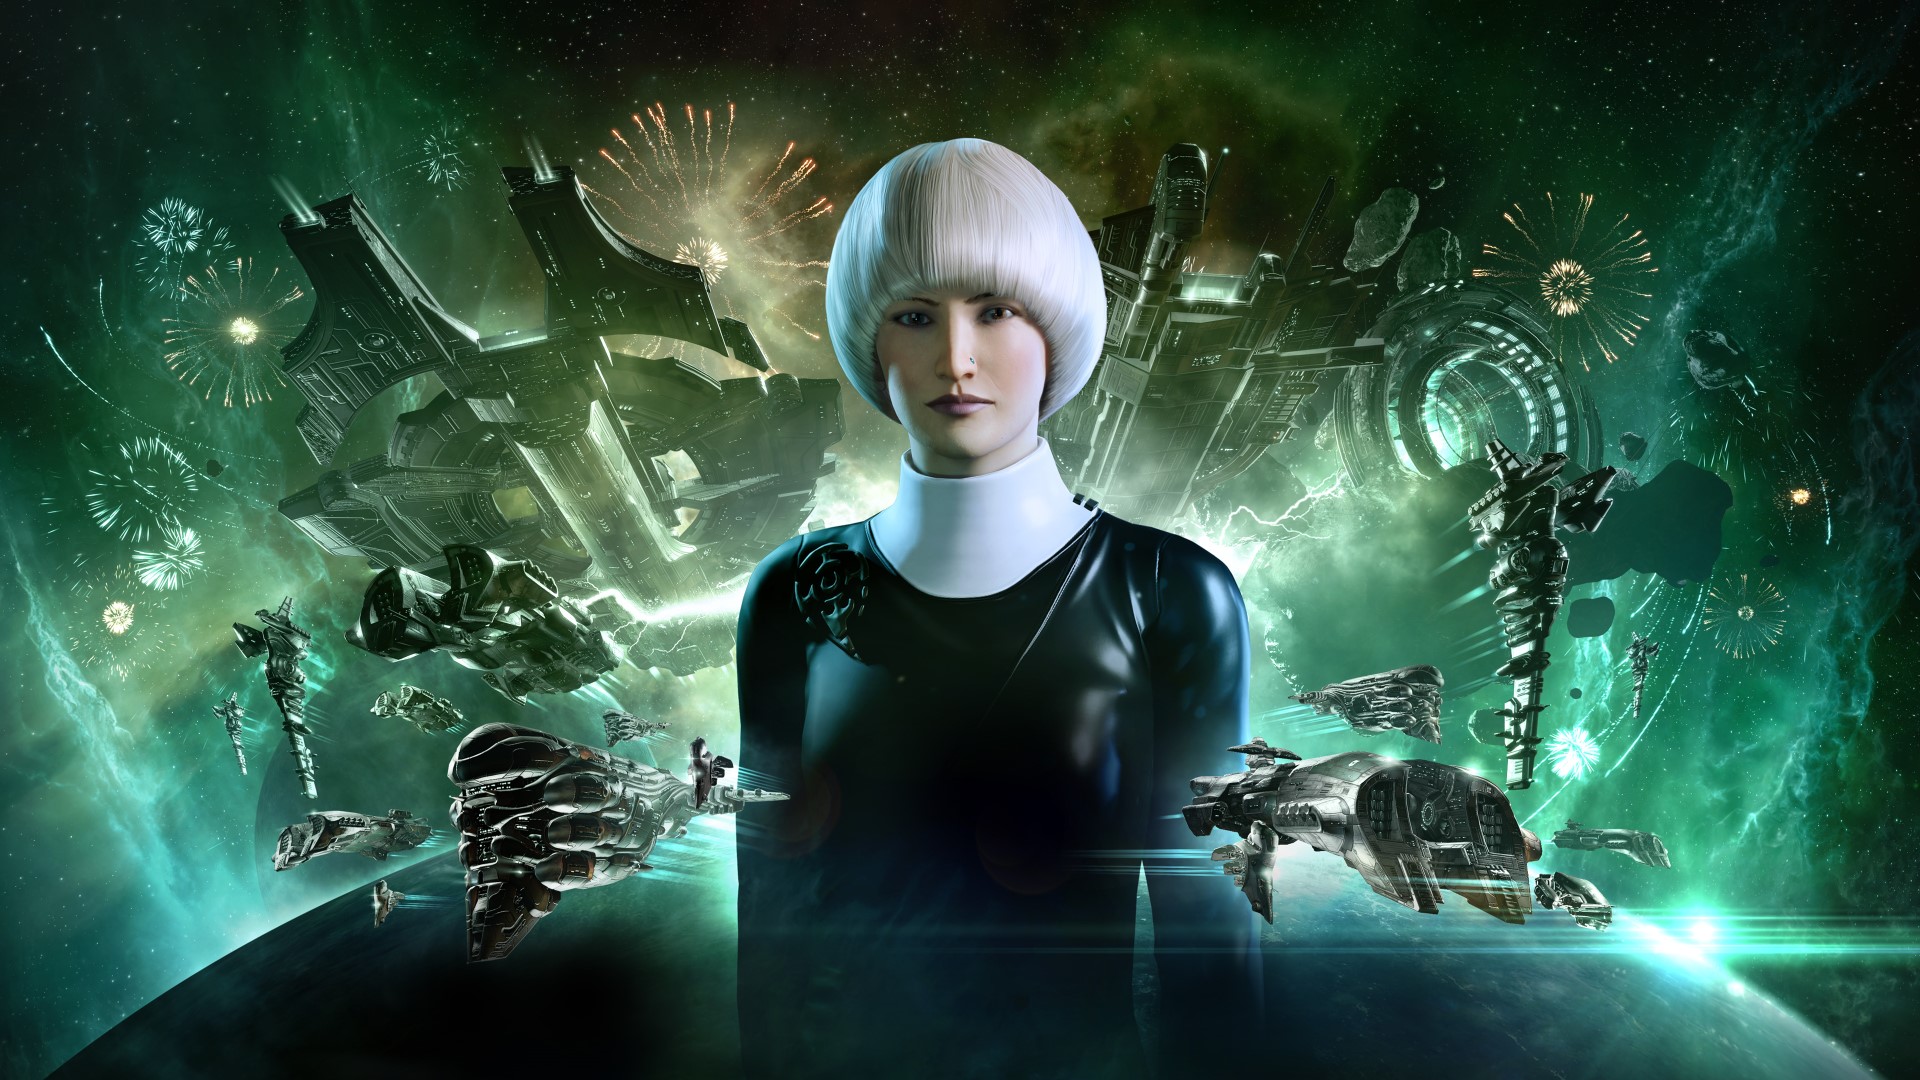 Eve Online officially marks Federation Day with login bonuses, parades, and more